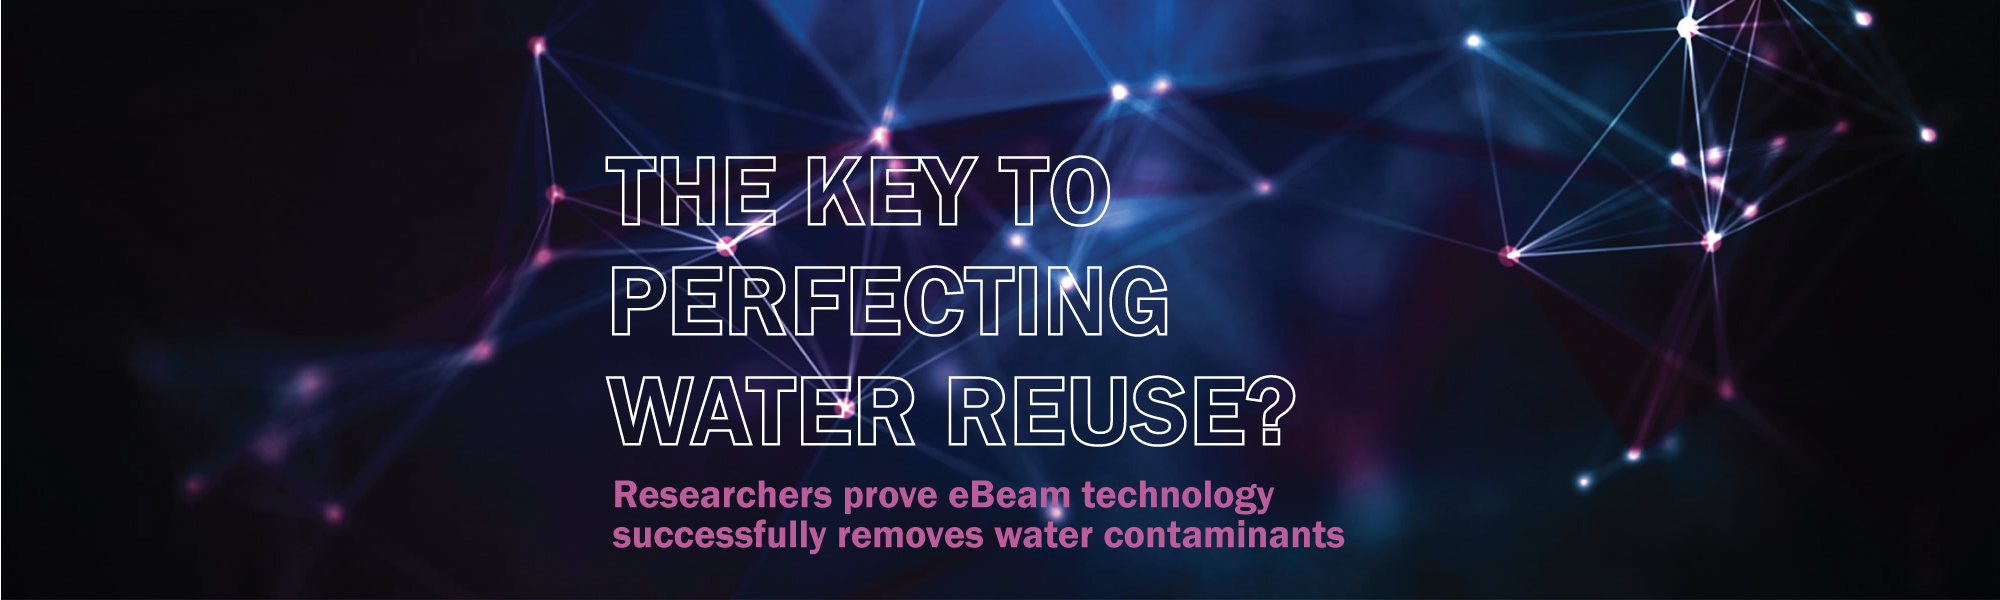 The key to perfecting water reuse?